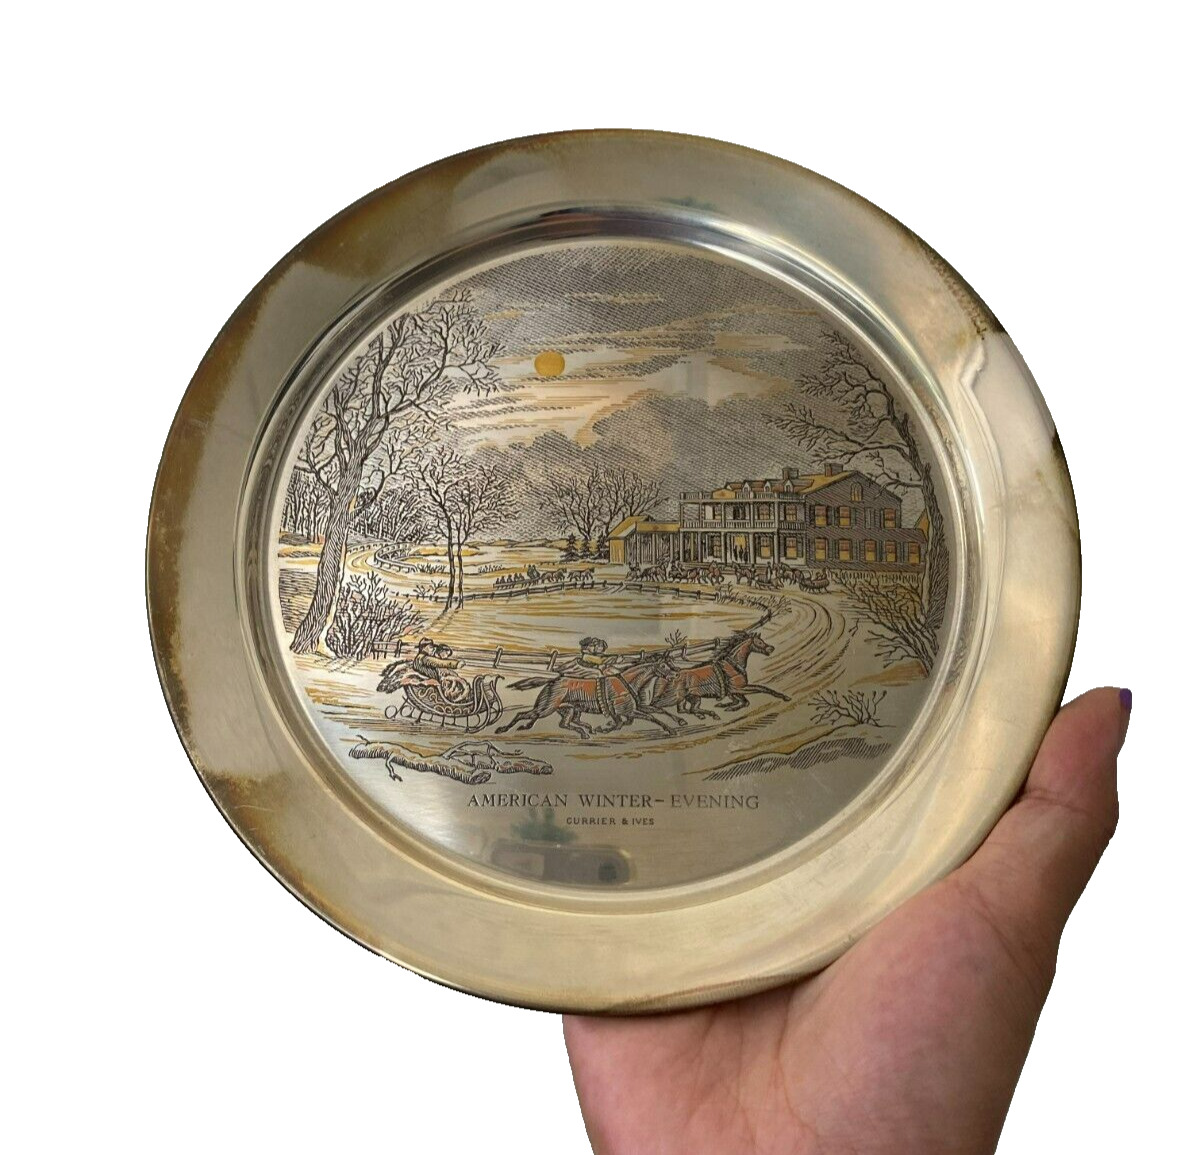 1976 Danbury Mint Sterling Silver Plate Limited Edition American Winter-Evening